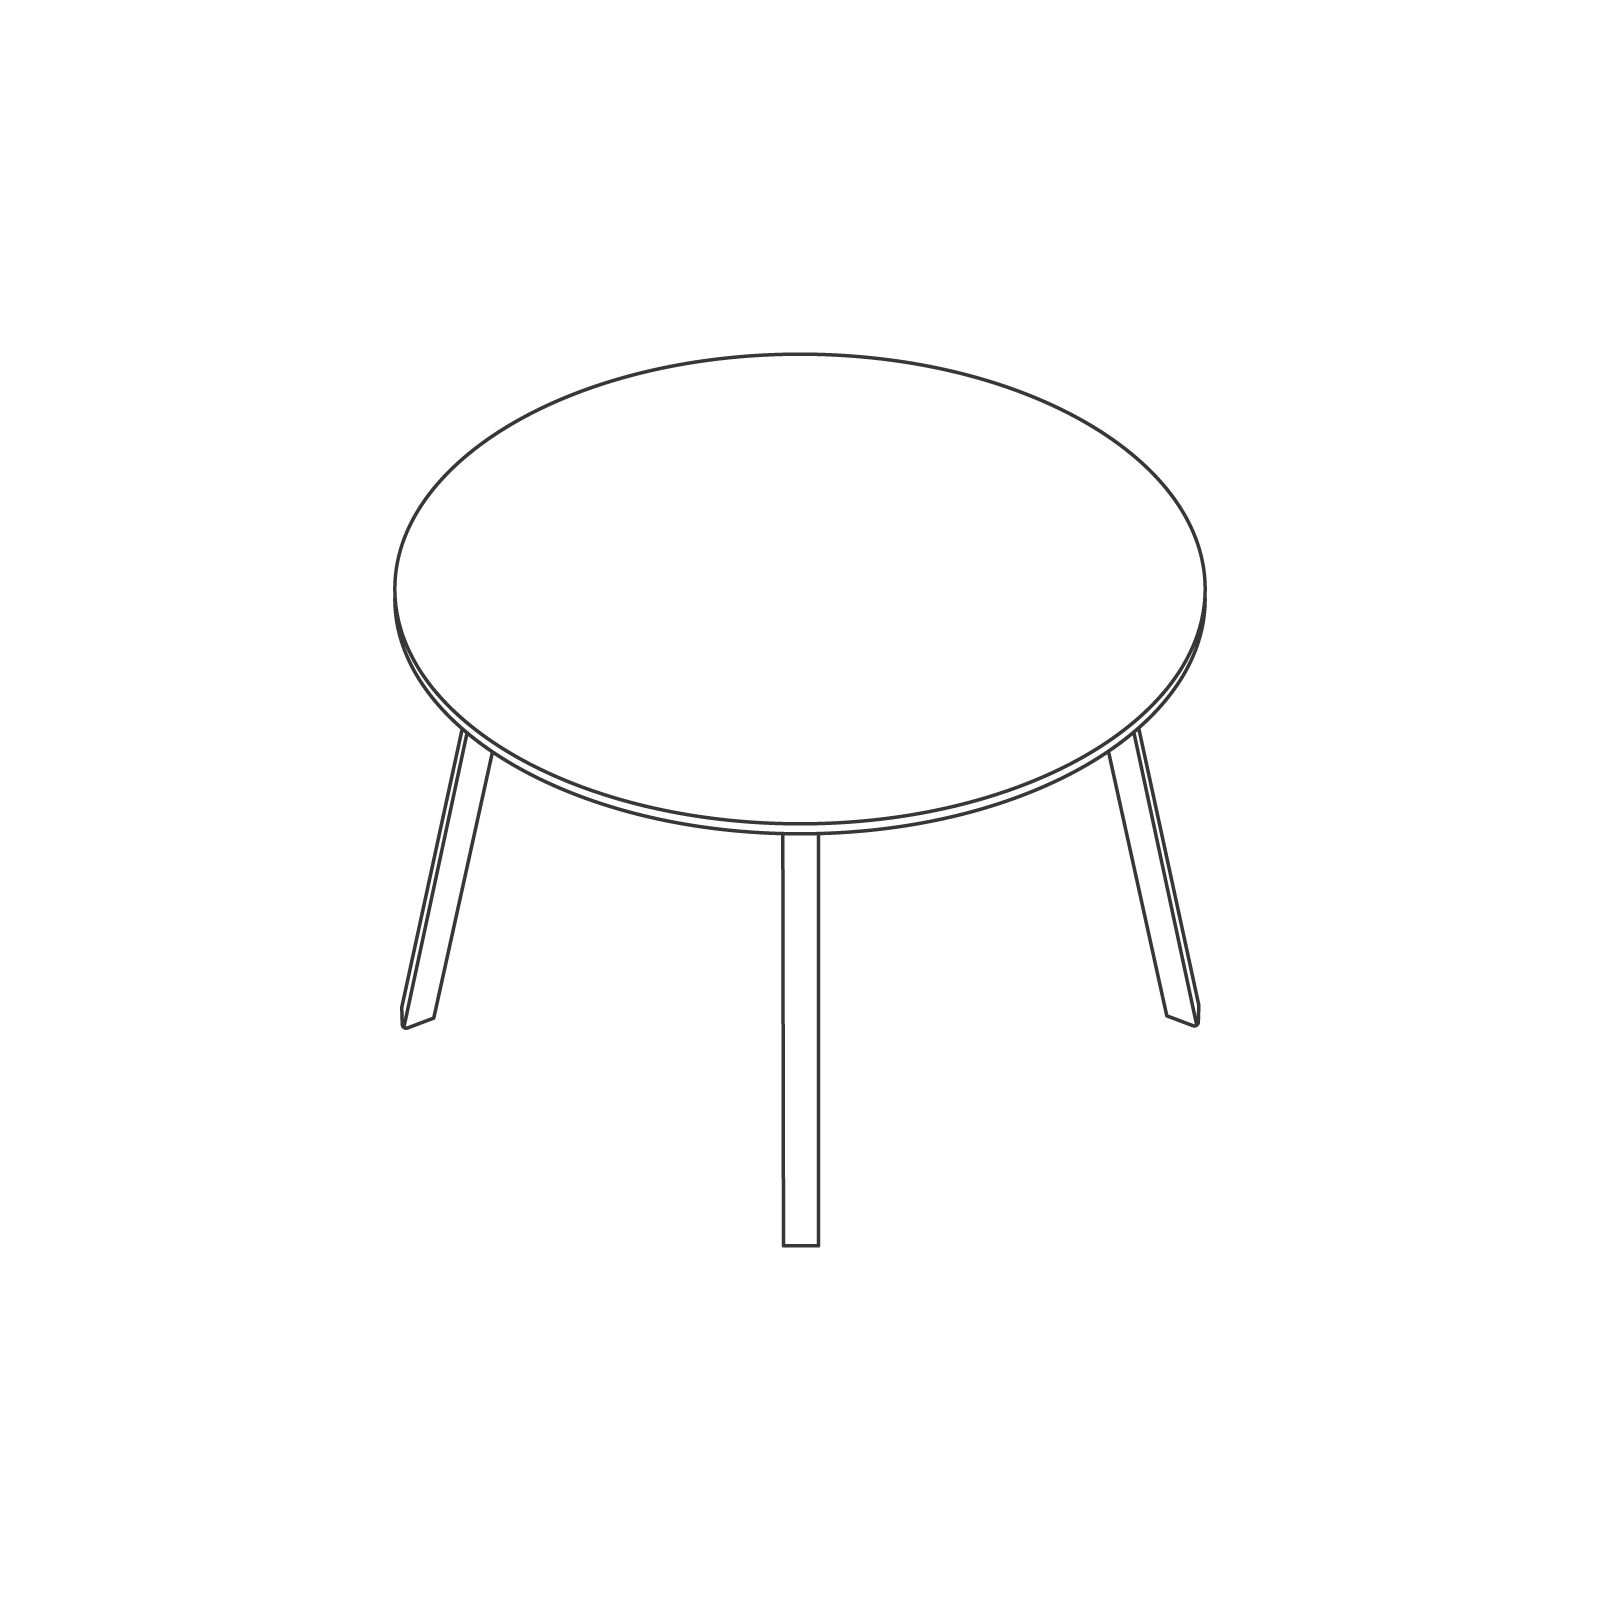 A line drawing - Triangle Leg Table–Round